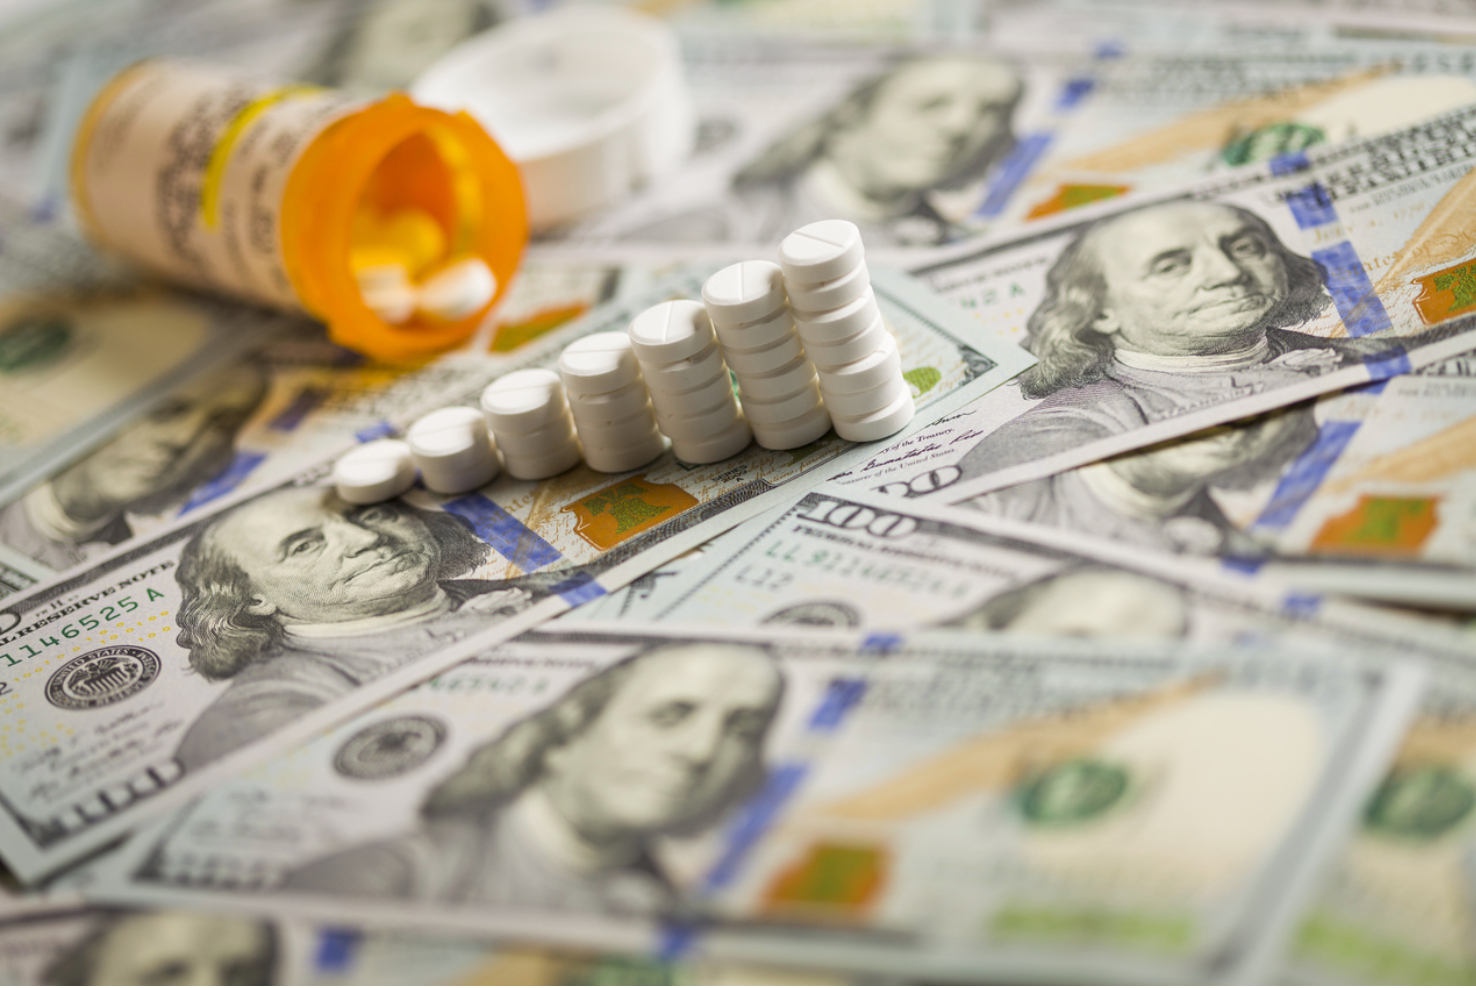 How PBMs Can Help Control the Cost of Specialty Medications